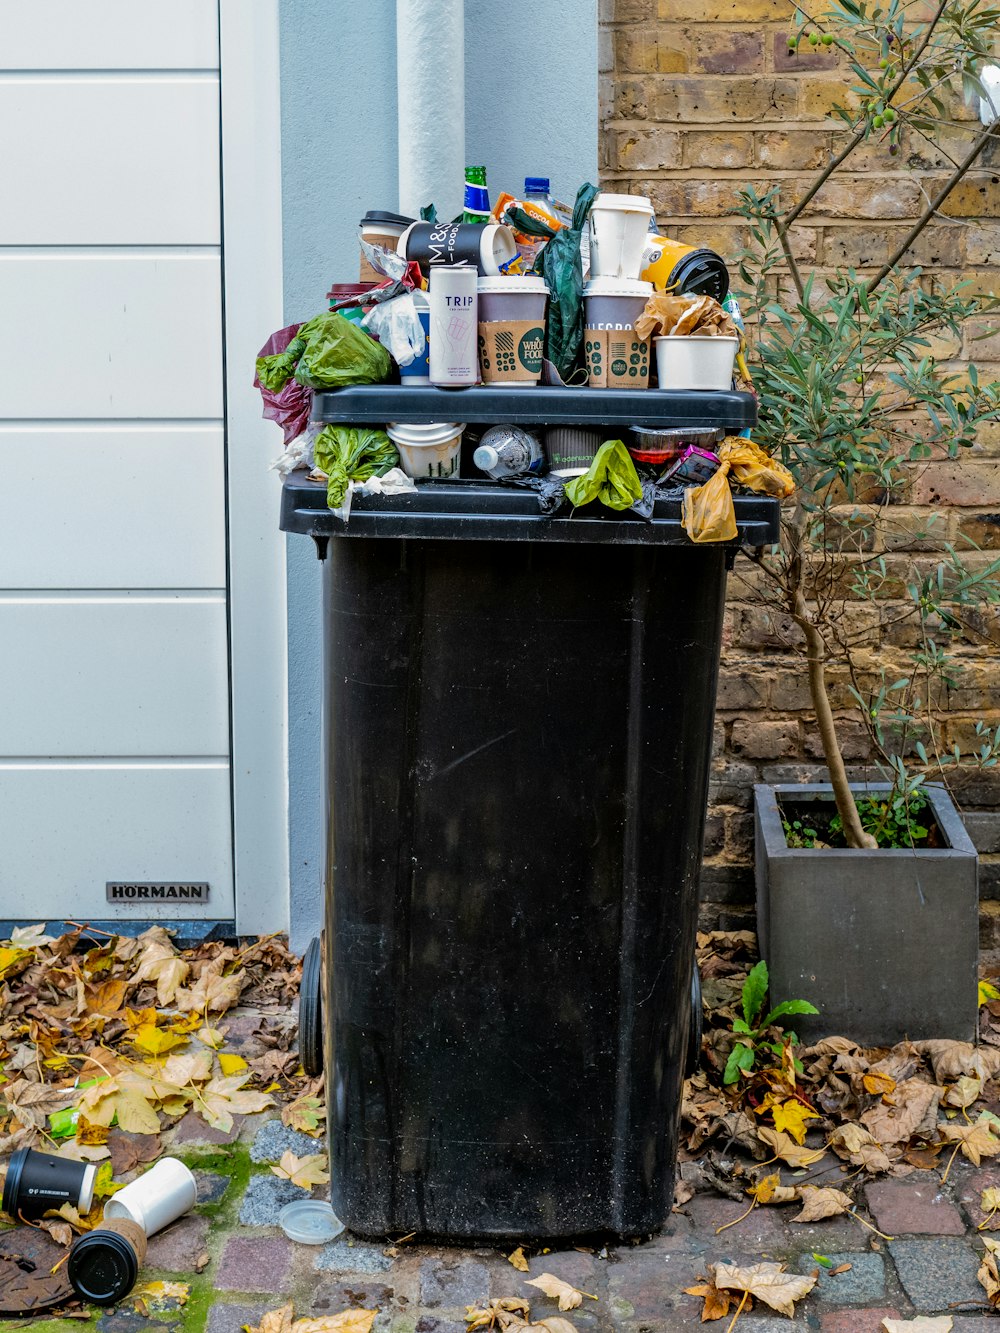 Premium Photo  Trash can and stacked of garage bags isolated on